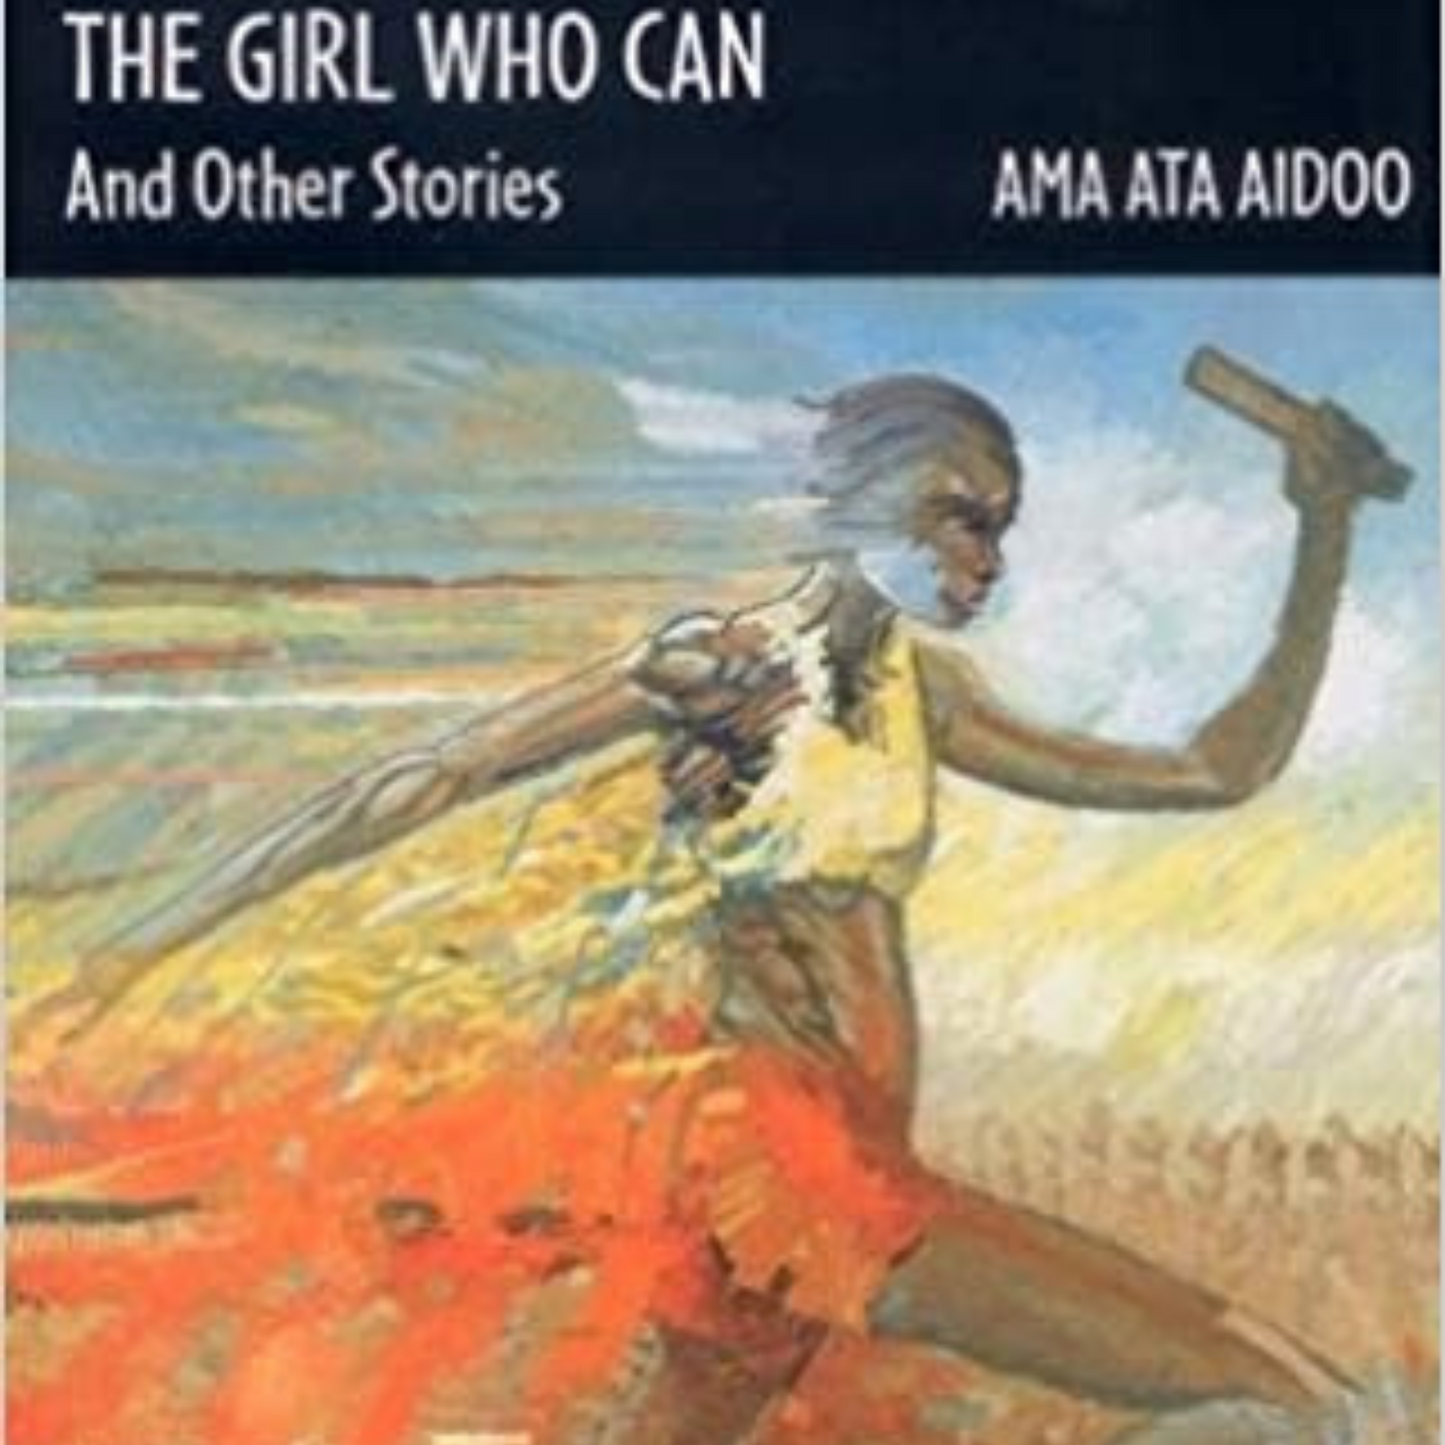 The Girl who can and Other Stories